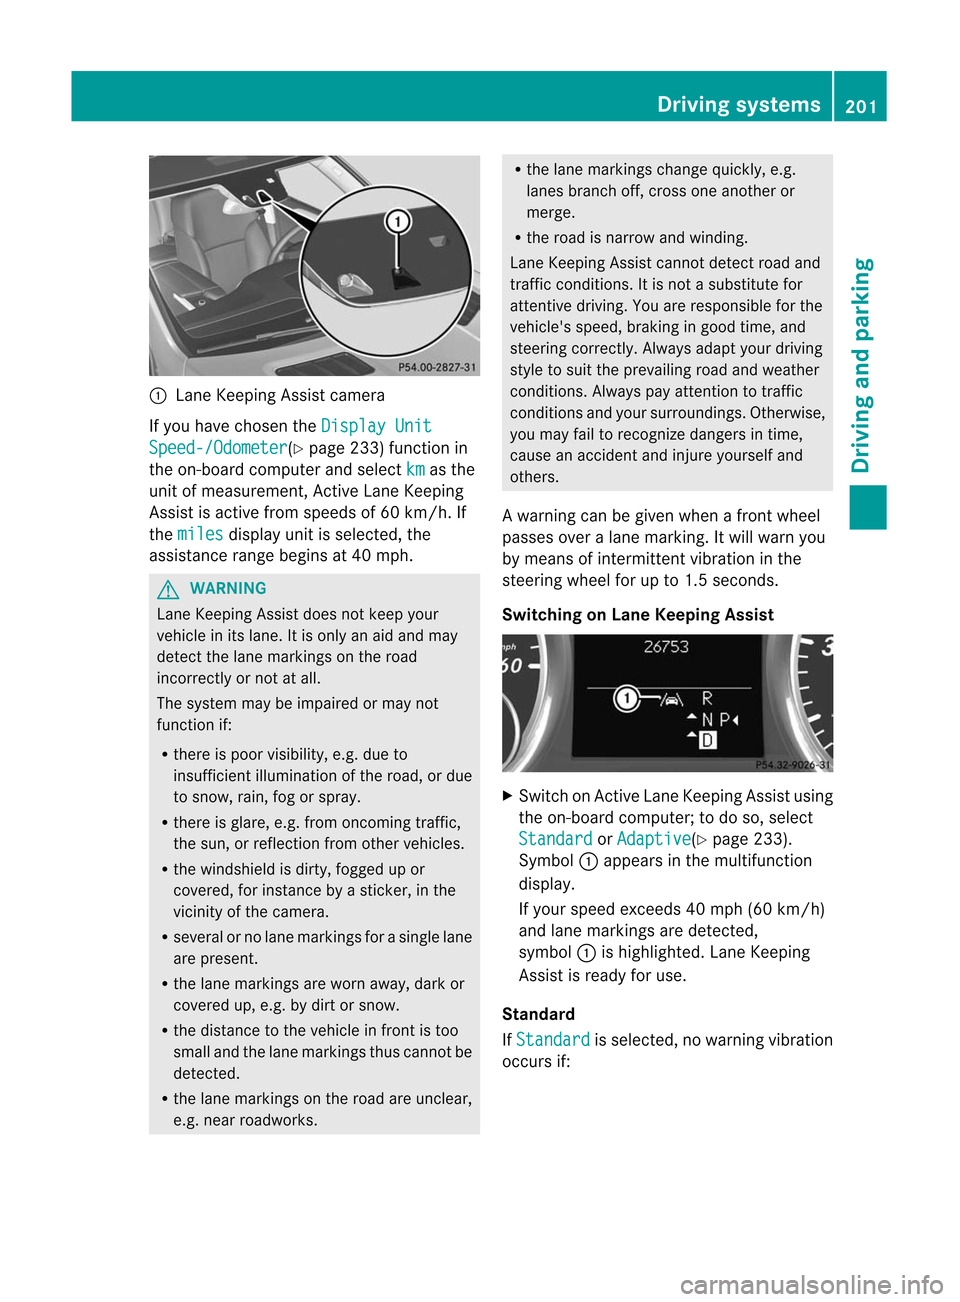 MERCEDES-BENZ M-Class 2012 W166 User Guide 
:
Lane Keepi ngAssist camera
If you have chosen the Display
Unit Speed-/Odom
eter (Y
page 233)function in
the on-board computer andselect km as
the
unit ofmeasu rement, ActiveLaneKeepi ng
Assist isac